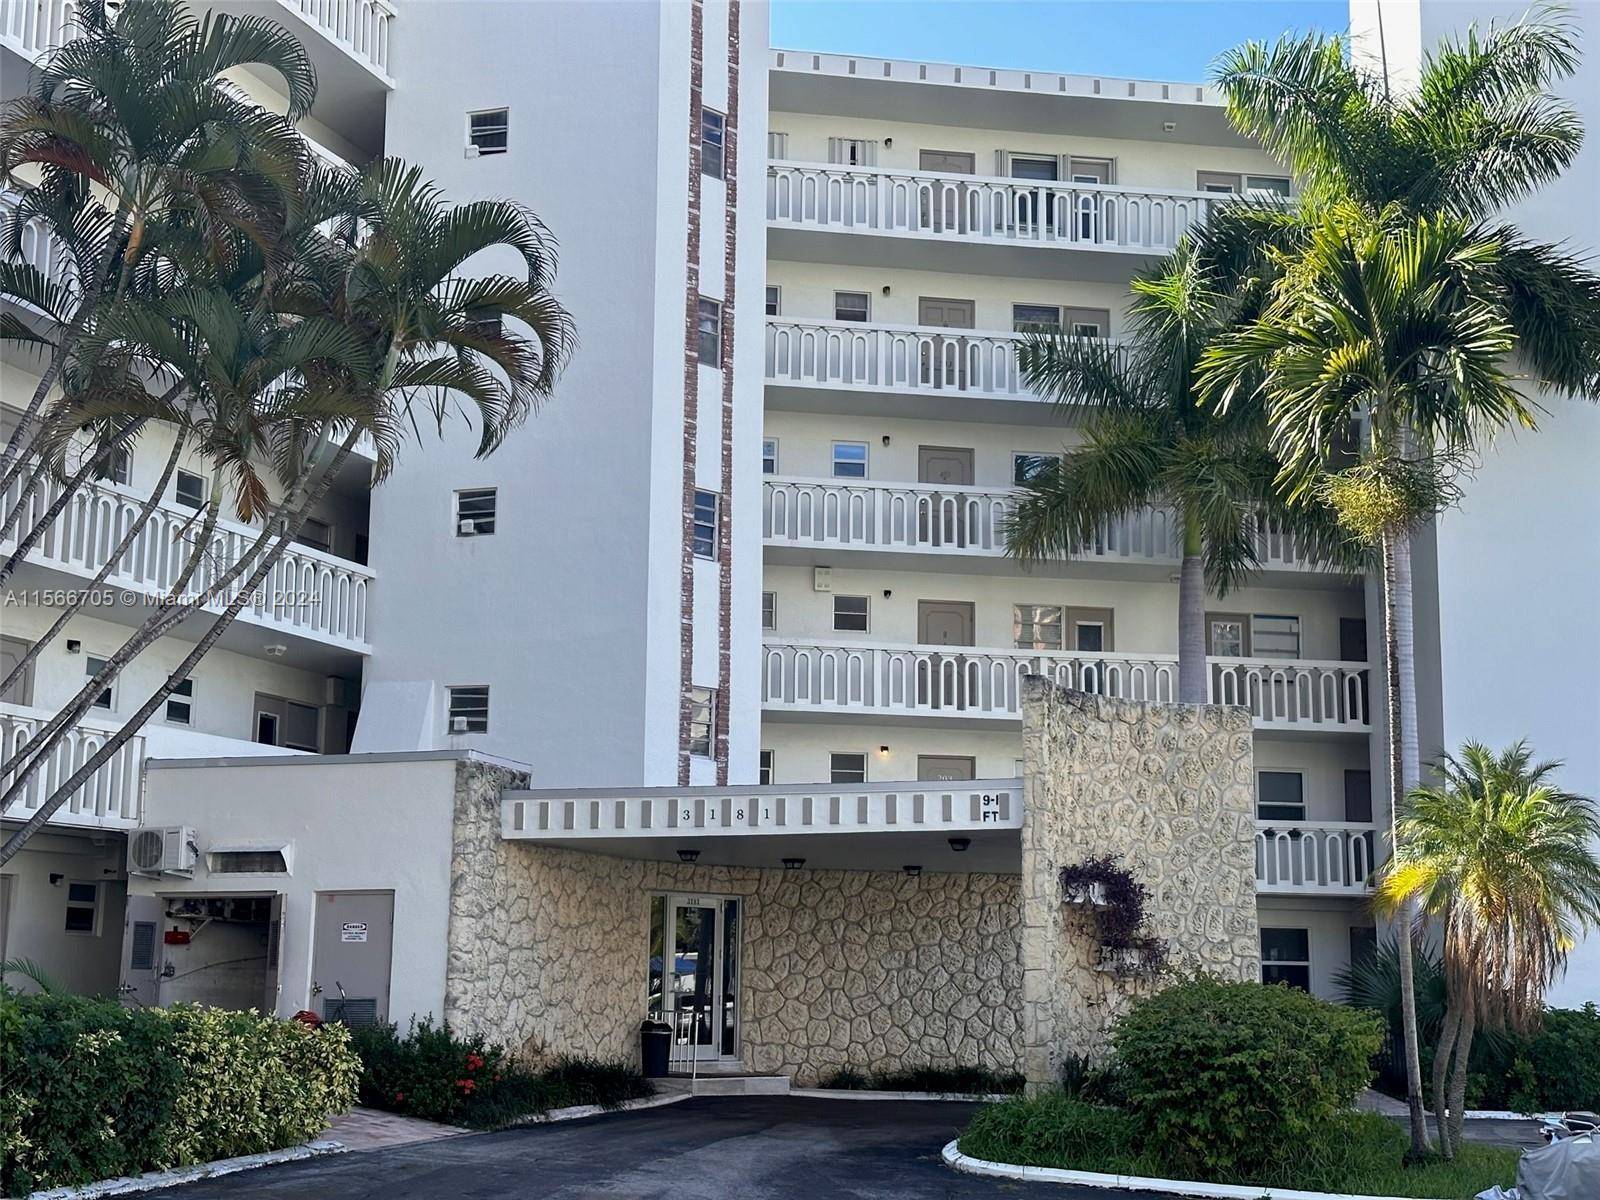 Great Location ! ! ! ! This 2 bedroom, 2 bath is within walking distance to the beach, right across the street !